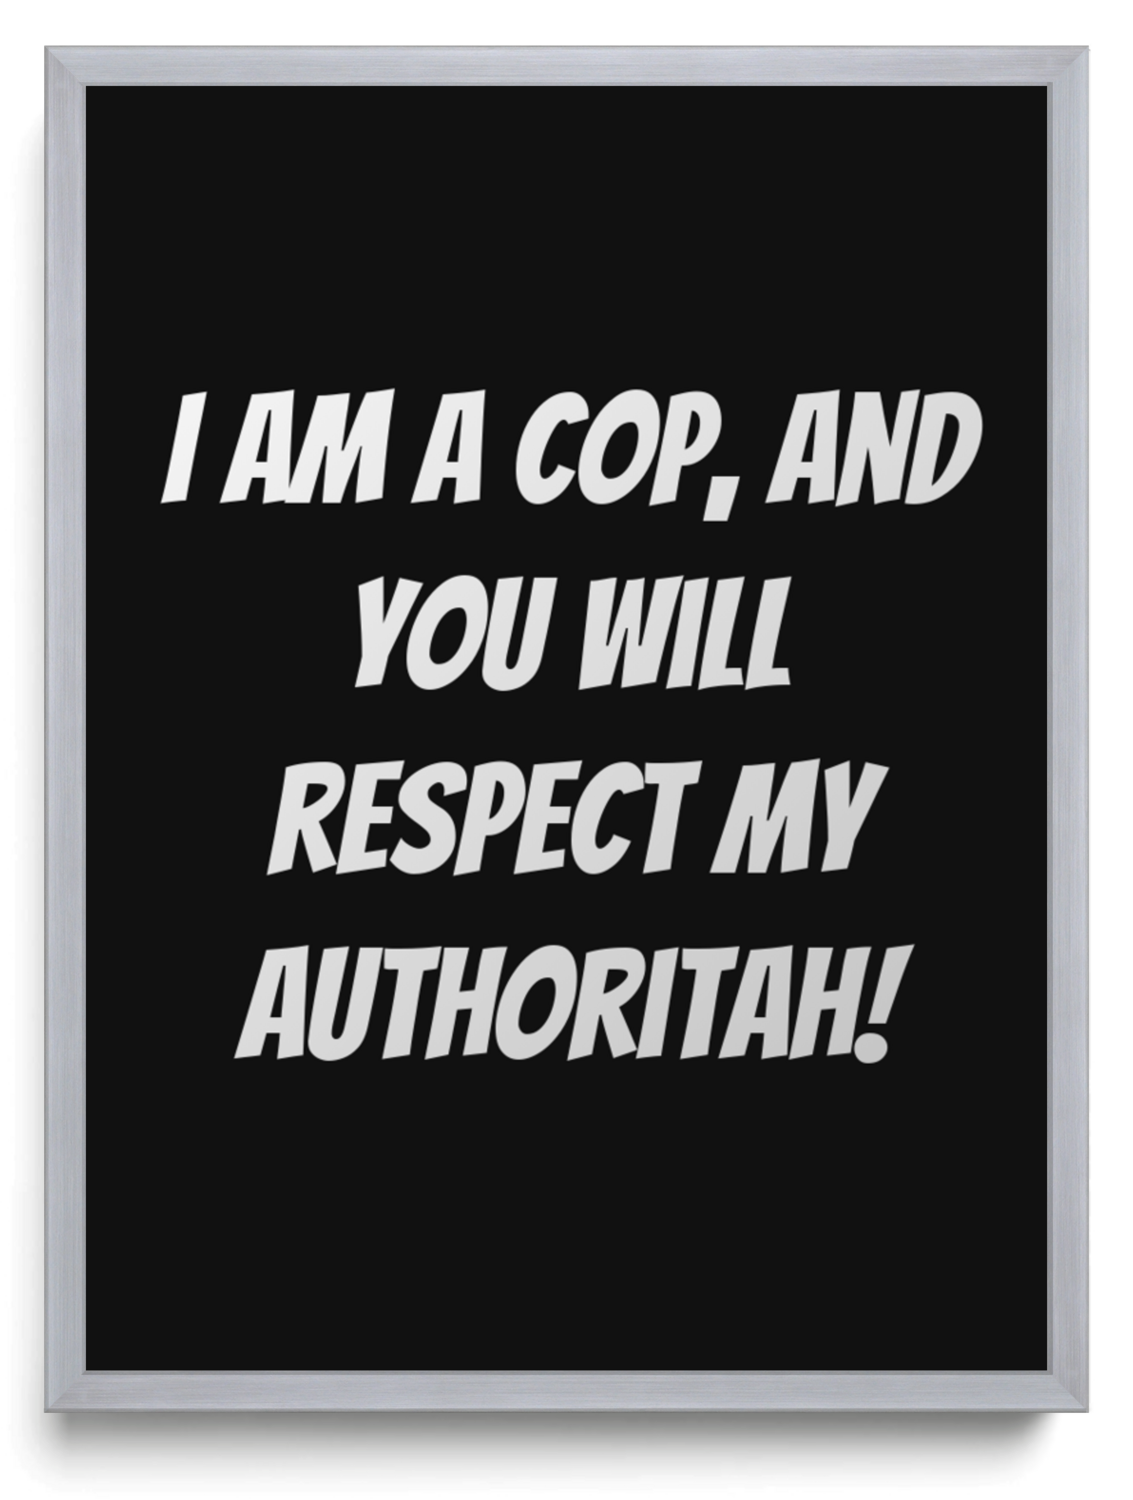 I am a cop and you will respect my authoritah framed typographic print